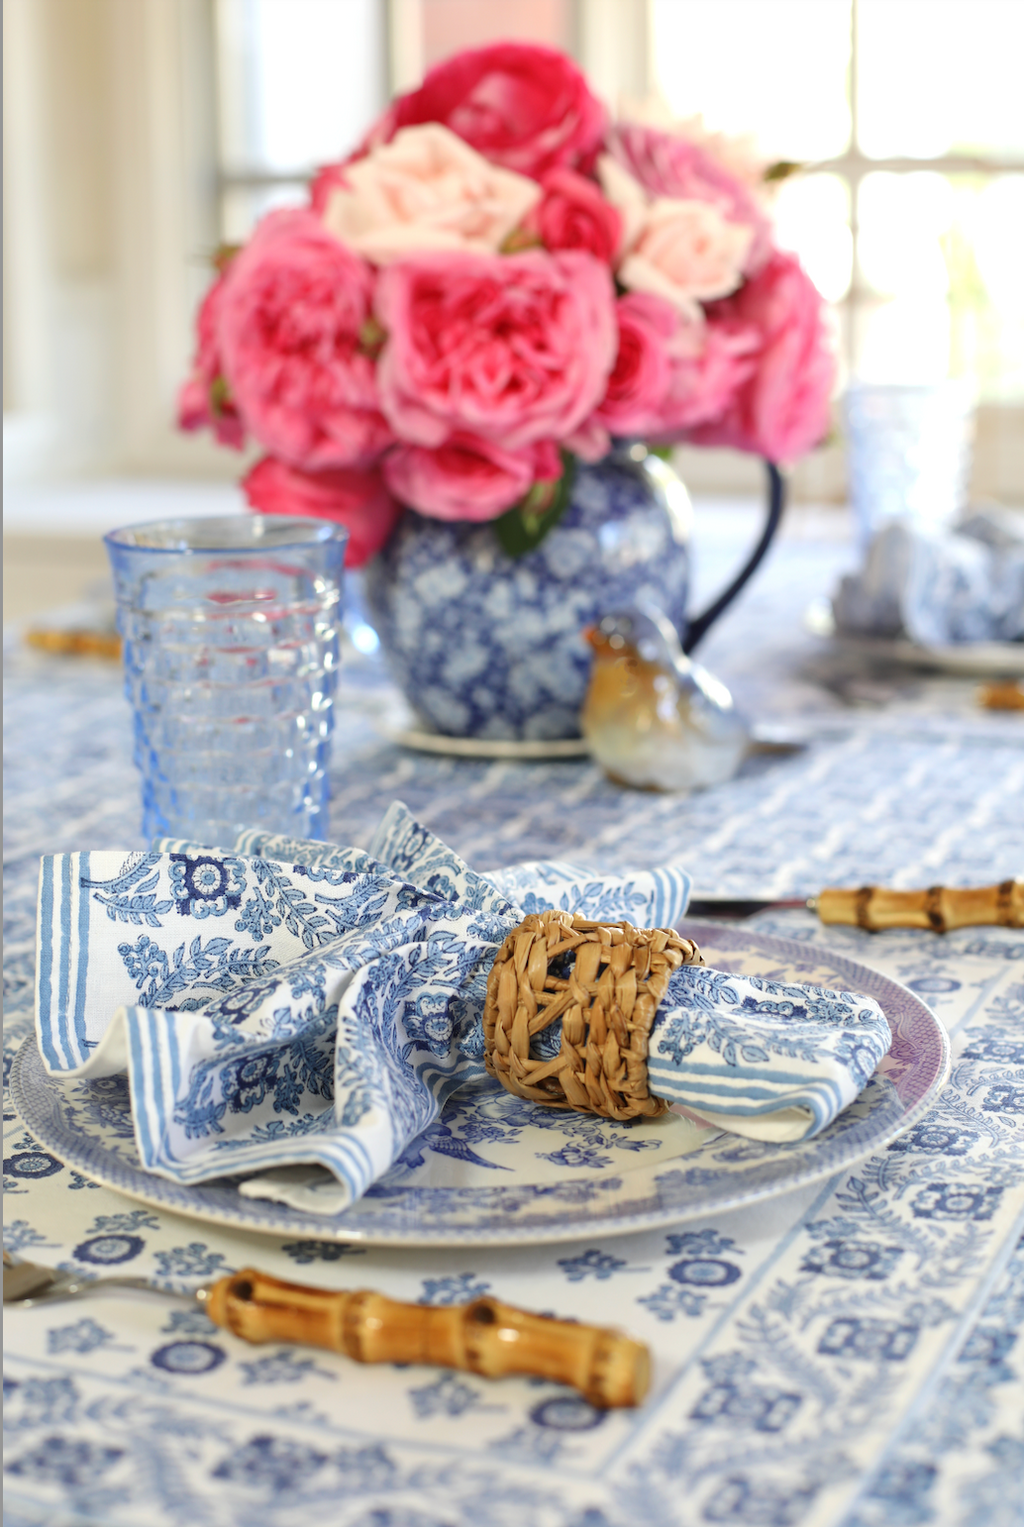 Villa Vaux Grand Tablecloth - Blue and White